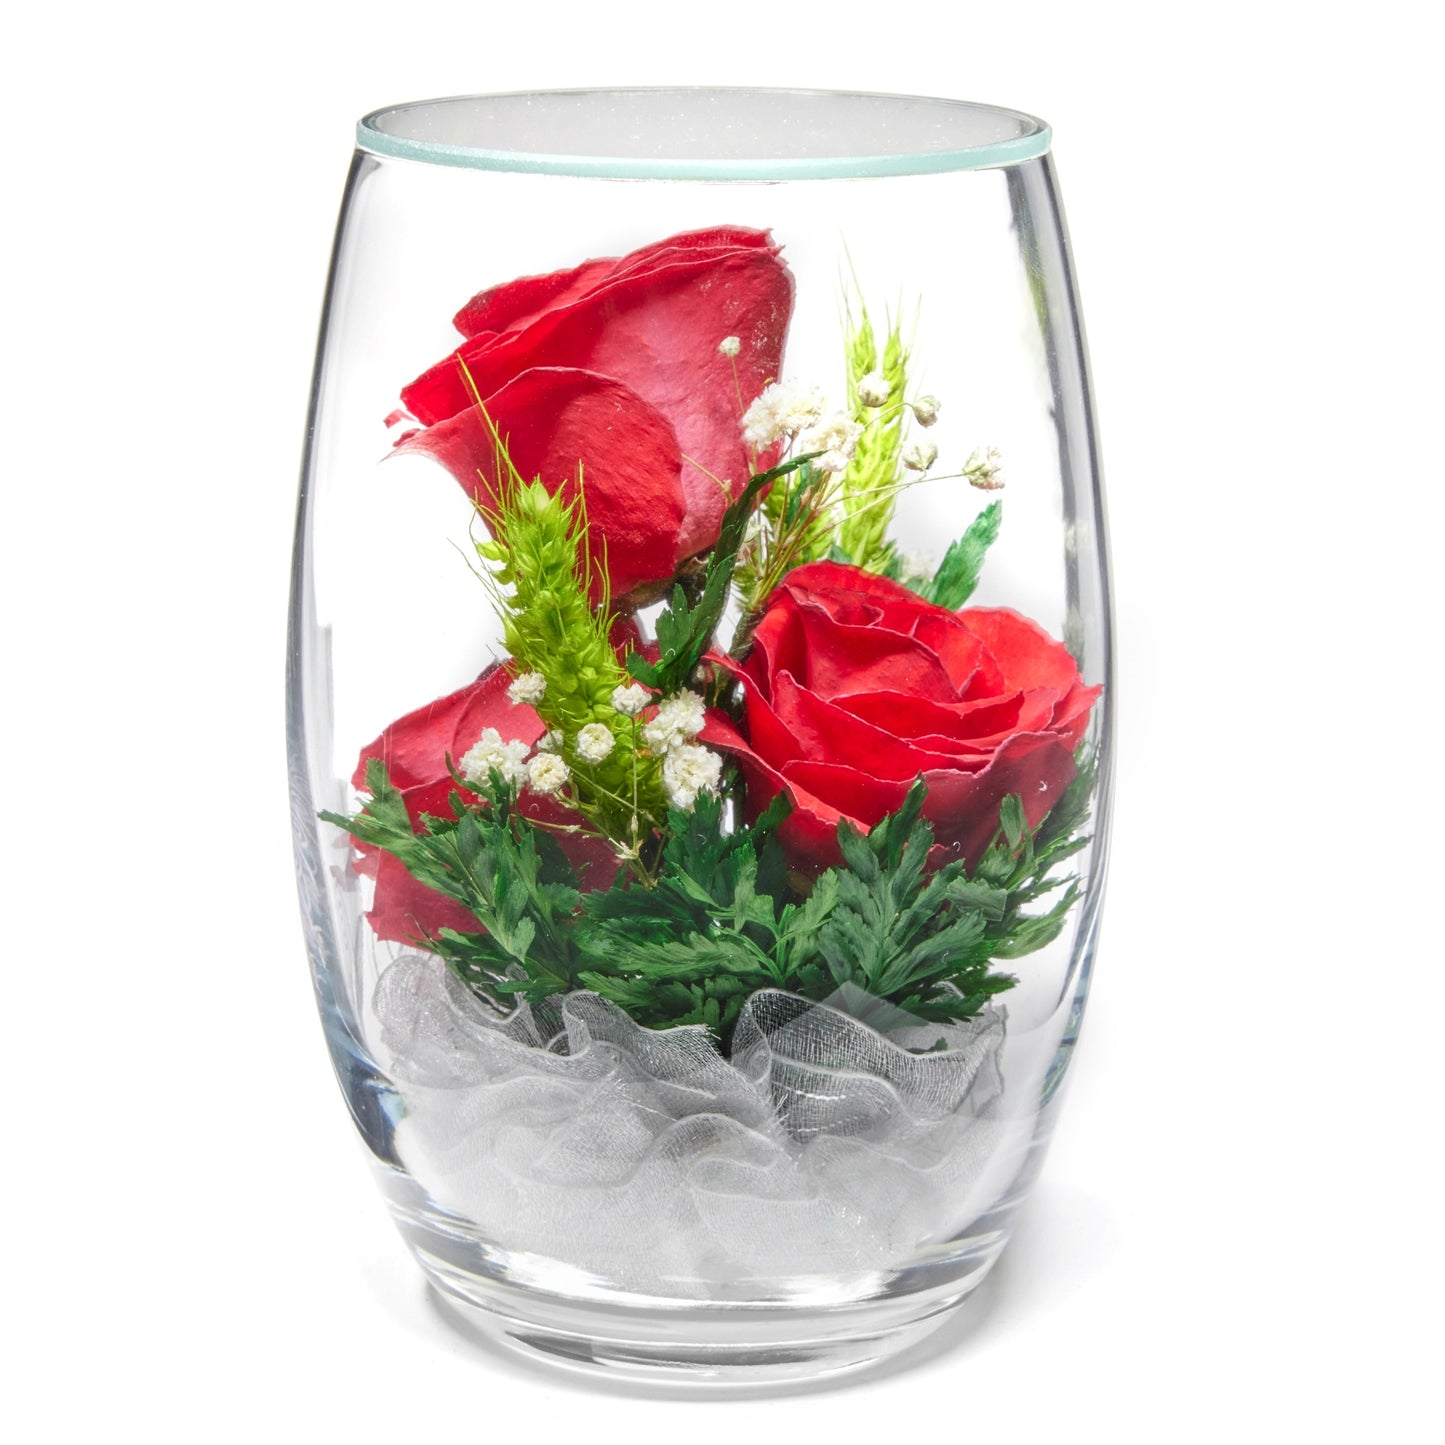 In Flores Veritas: Trio of Eternal Roses in Glass-like Vase - Lasts up to 5 Years - Unique Gift for Any Occasion